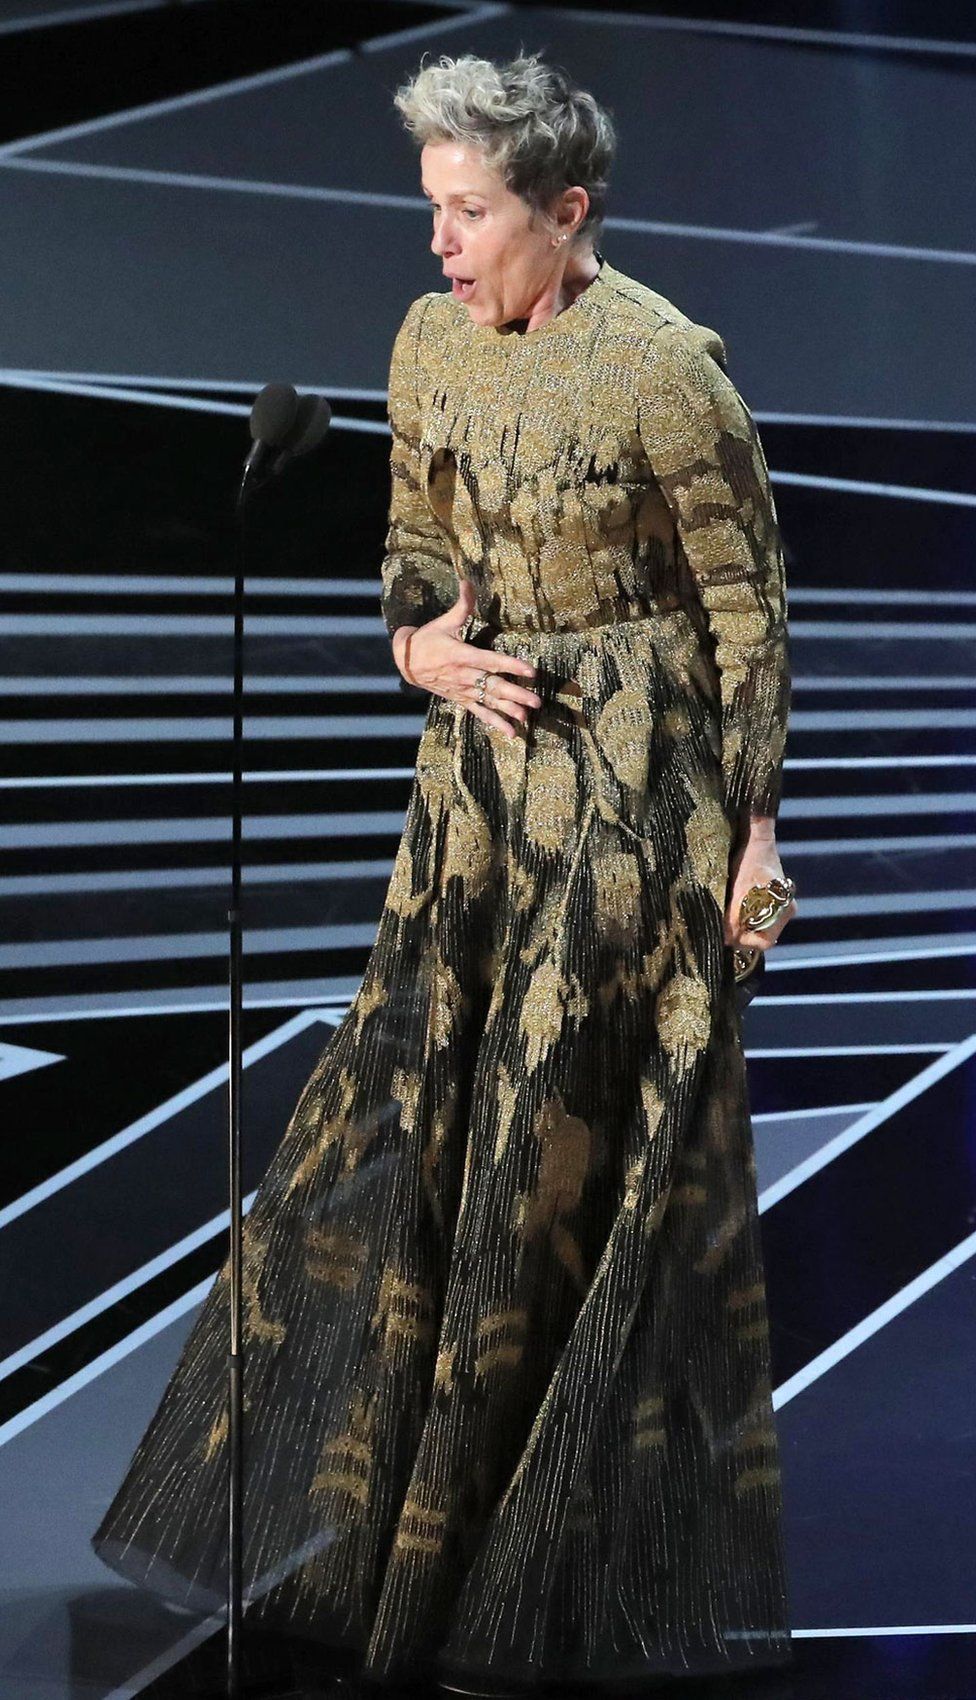 Frances McDormand onstage with her Oscar